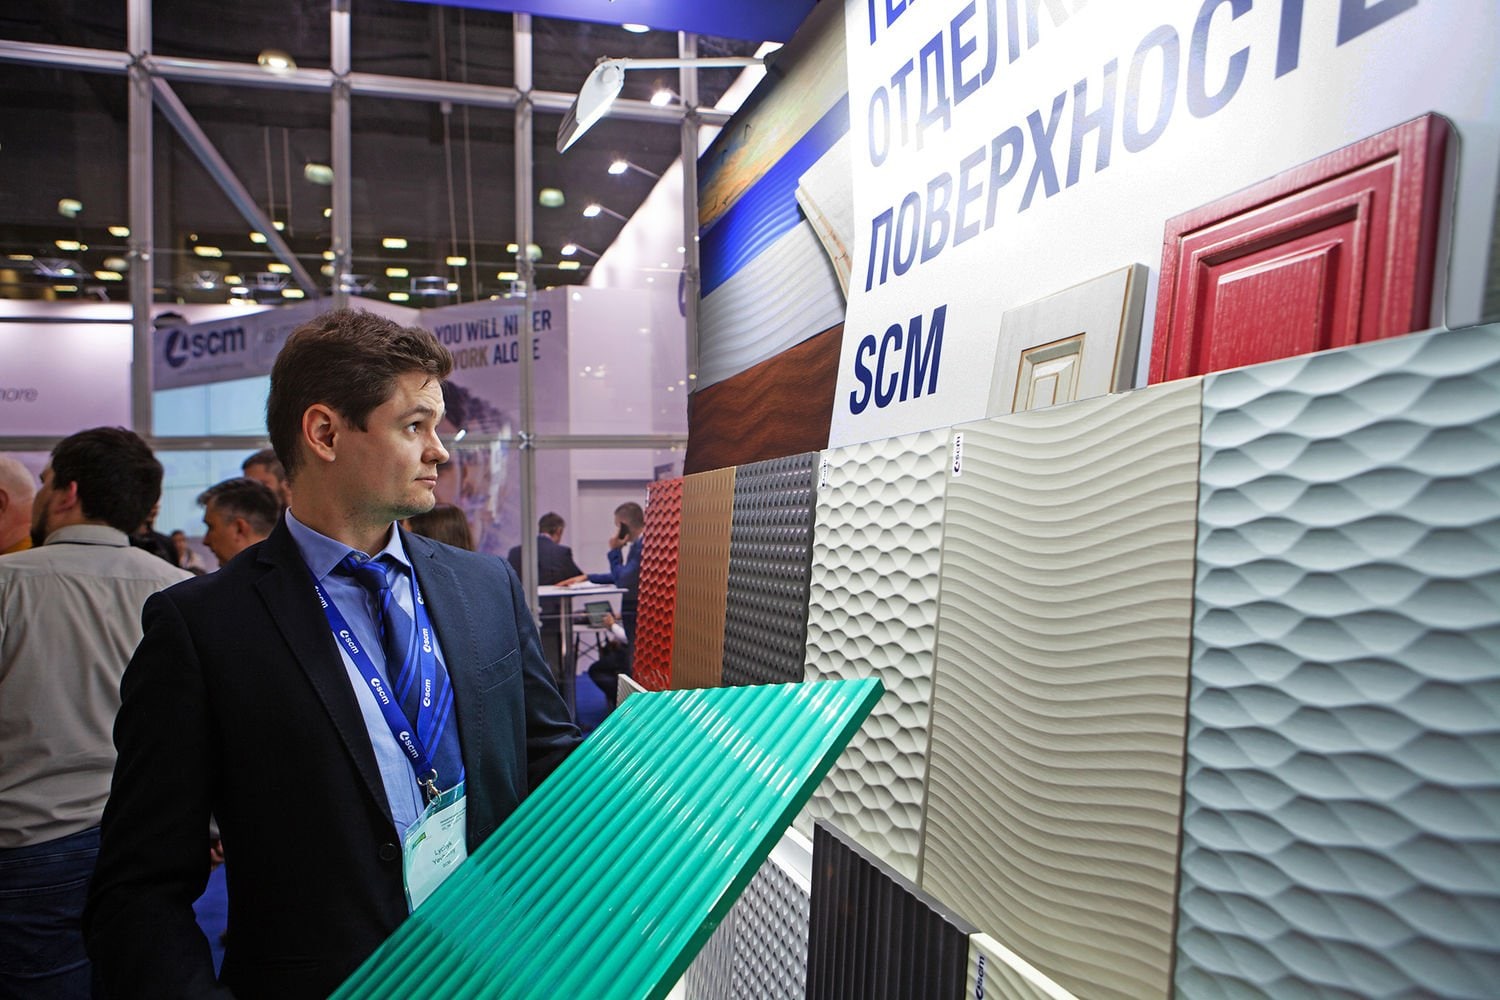 Woodex, day 2: the SCM team welcomes journalists and visitors for a “total touch experience”